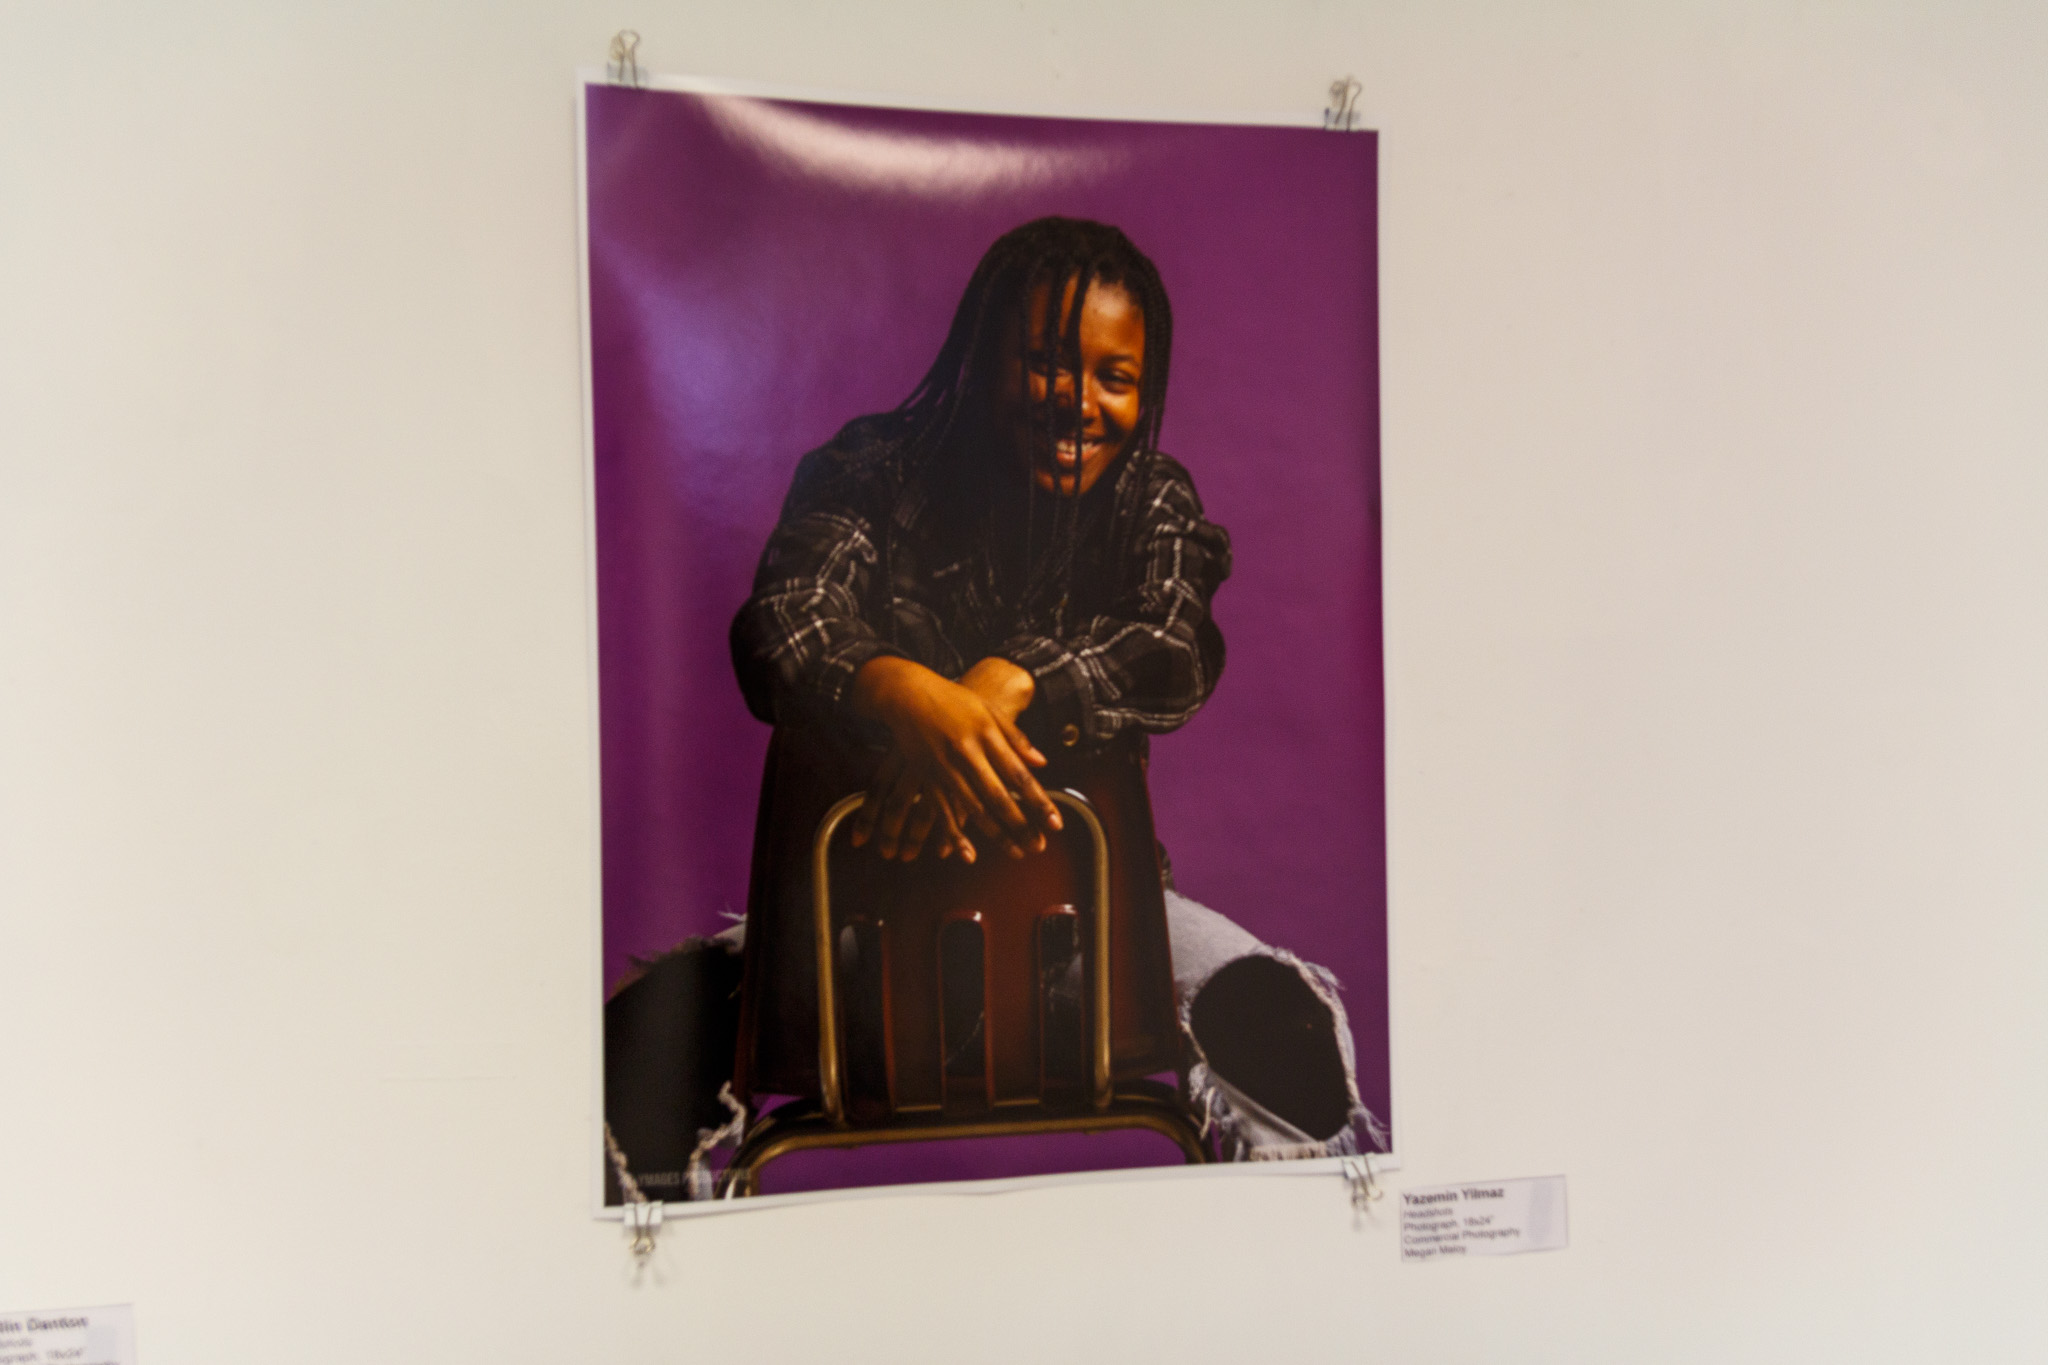 One of Yazemin Yilmaz's portrait photography projects on display at the Time and Photo Student Showcase. Sal DiMaggio | The Montclarion